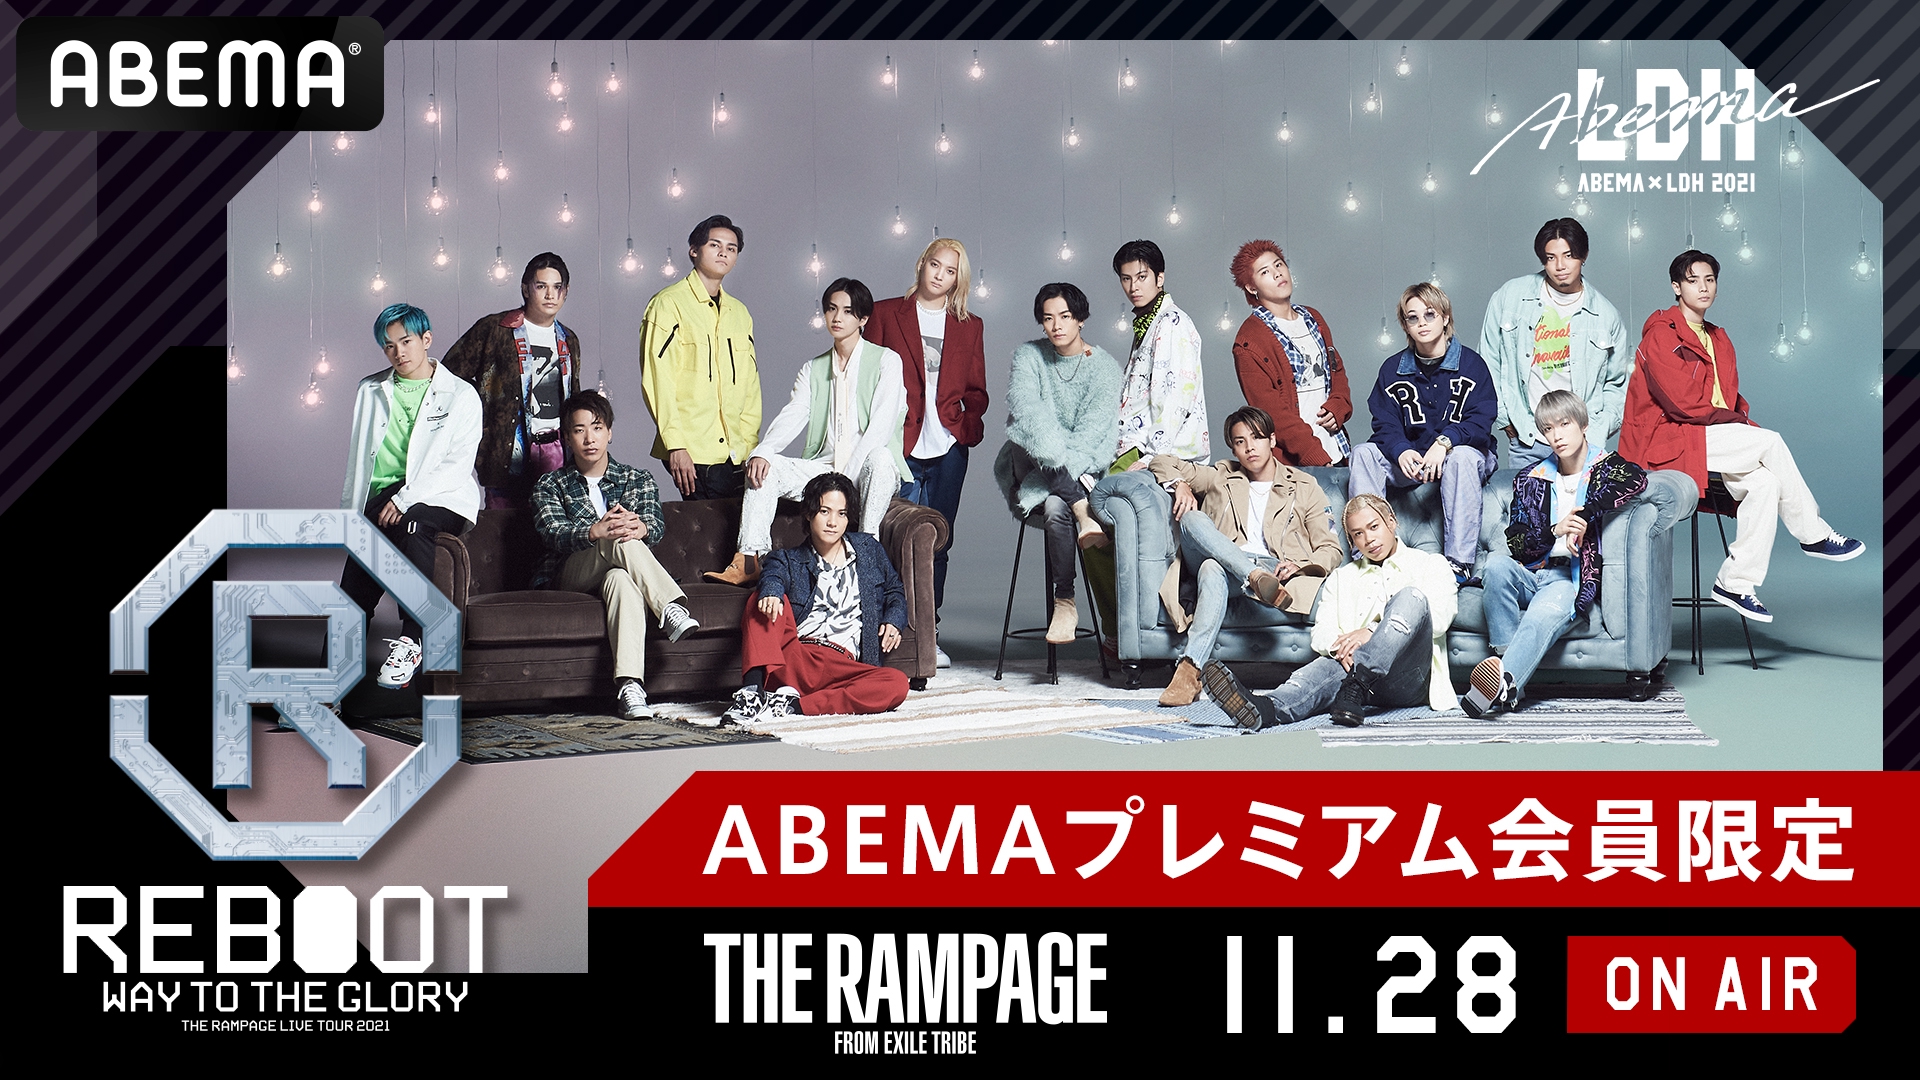 The Rampage Live Tour 21 Reboot Way To The Glory を11月28日 日 15 00より生配信決定 11月1日 月 よりチケット販売開始 Abema Ppv Online Live Abema